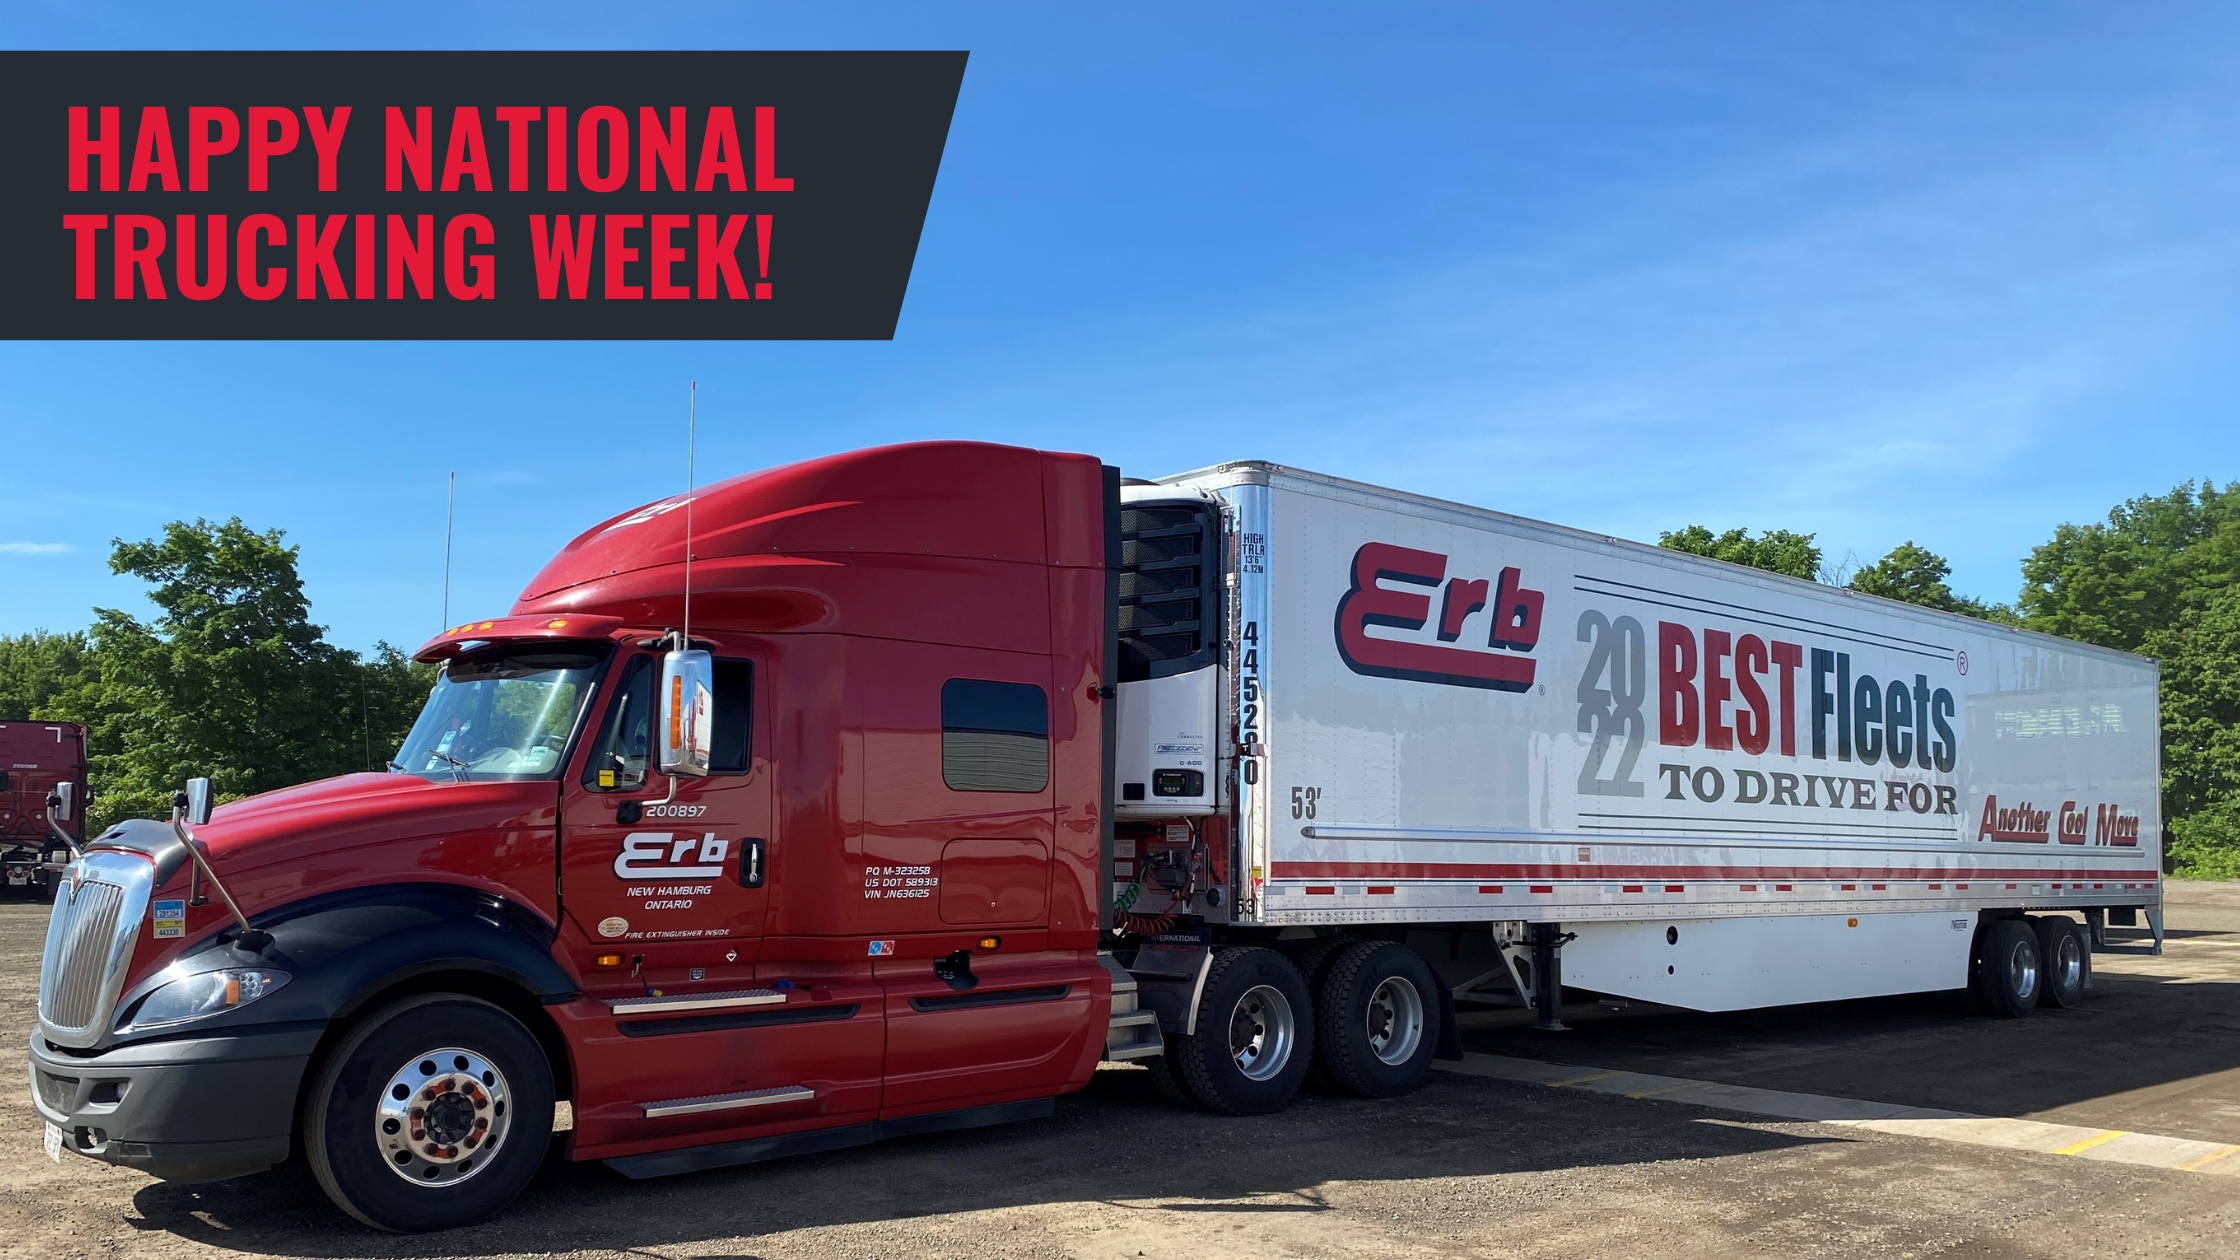 Happy National Trucking Week!</strong>